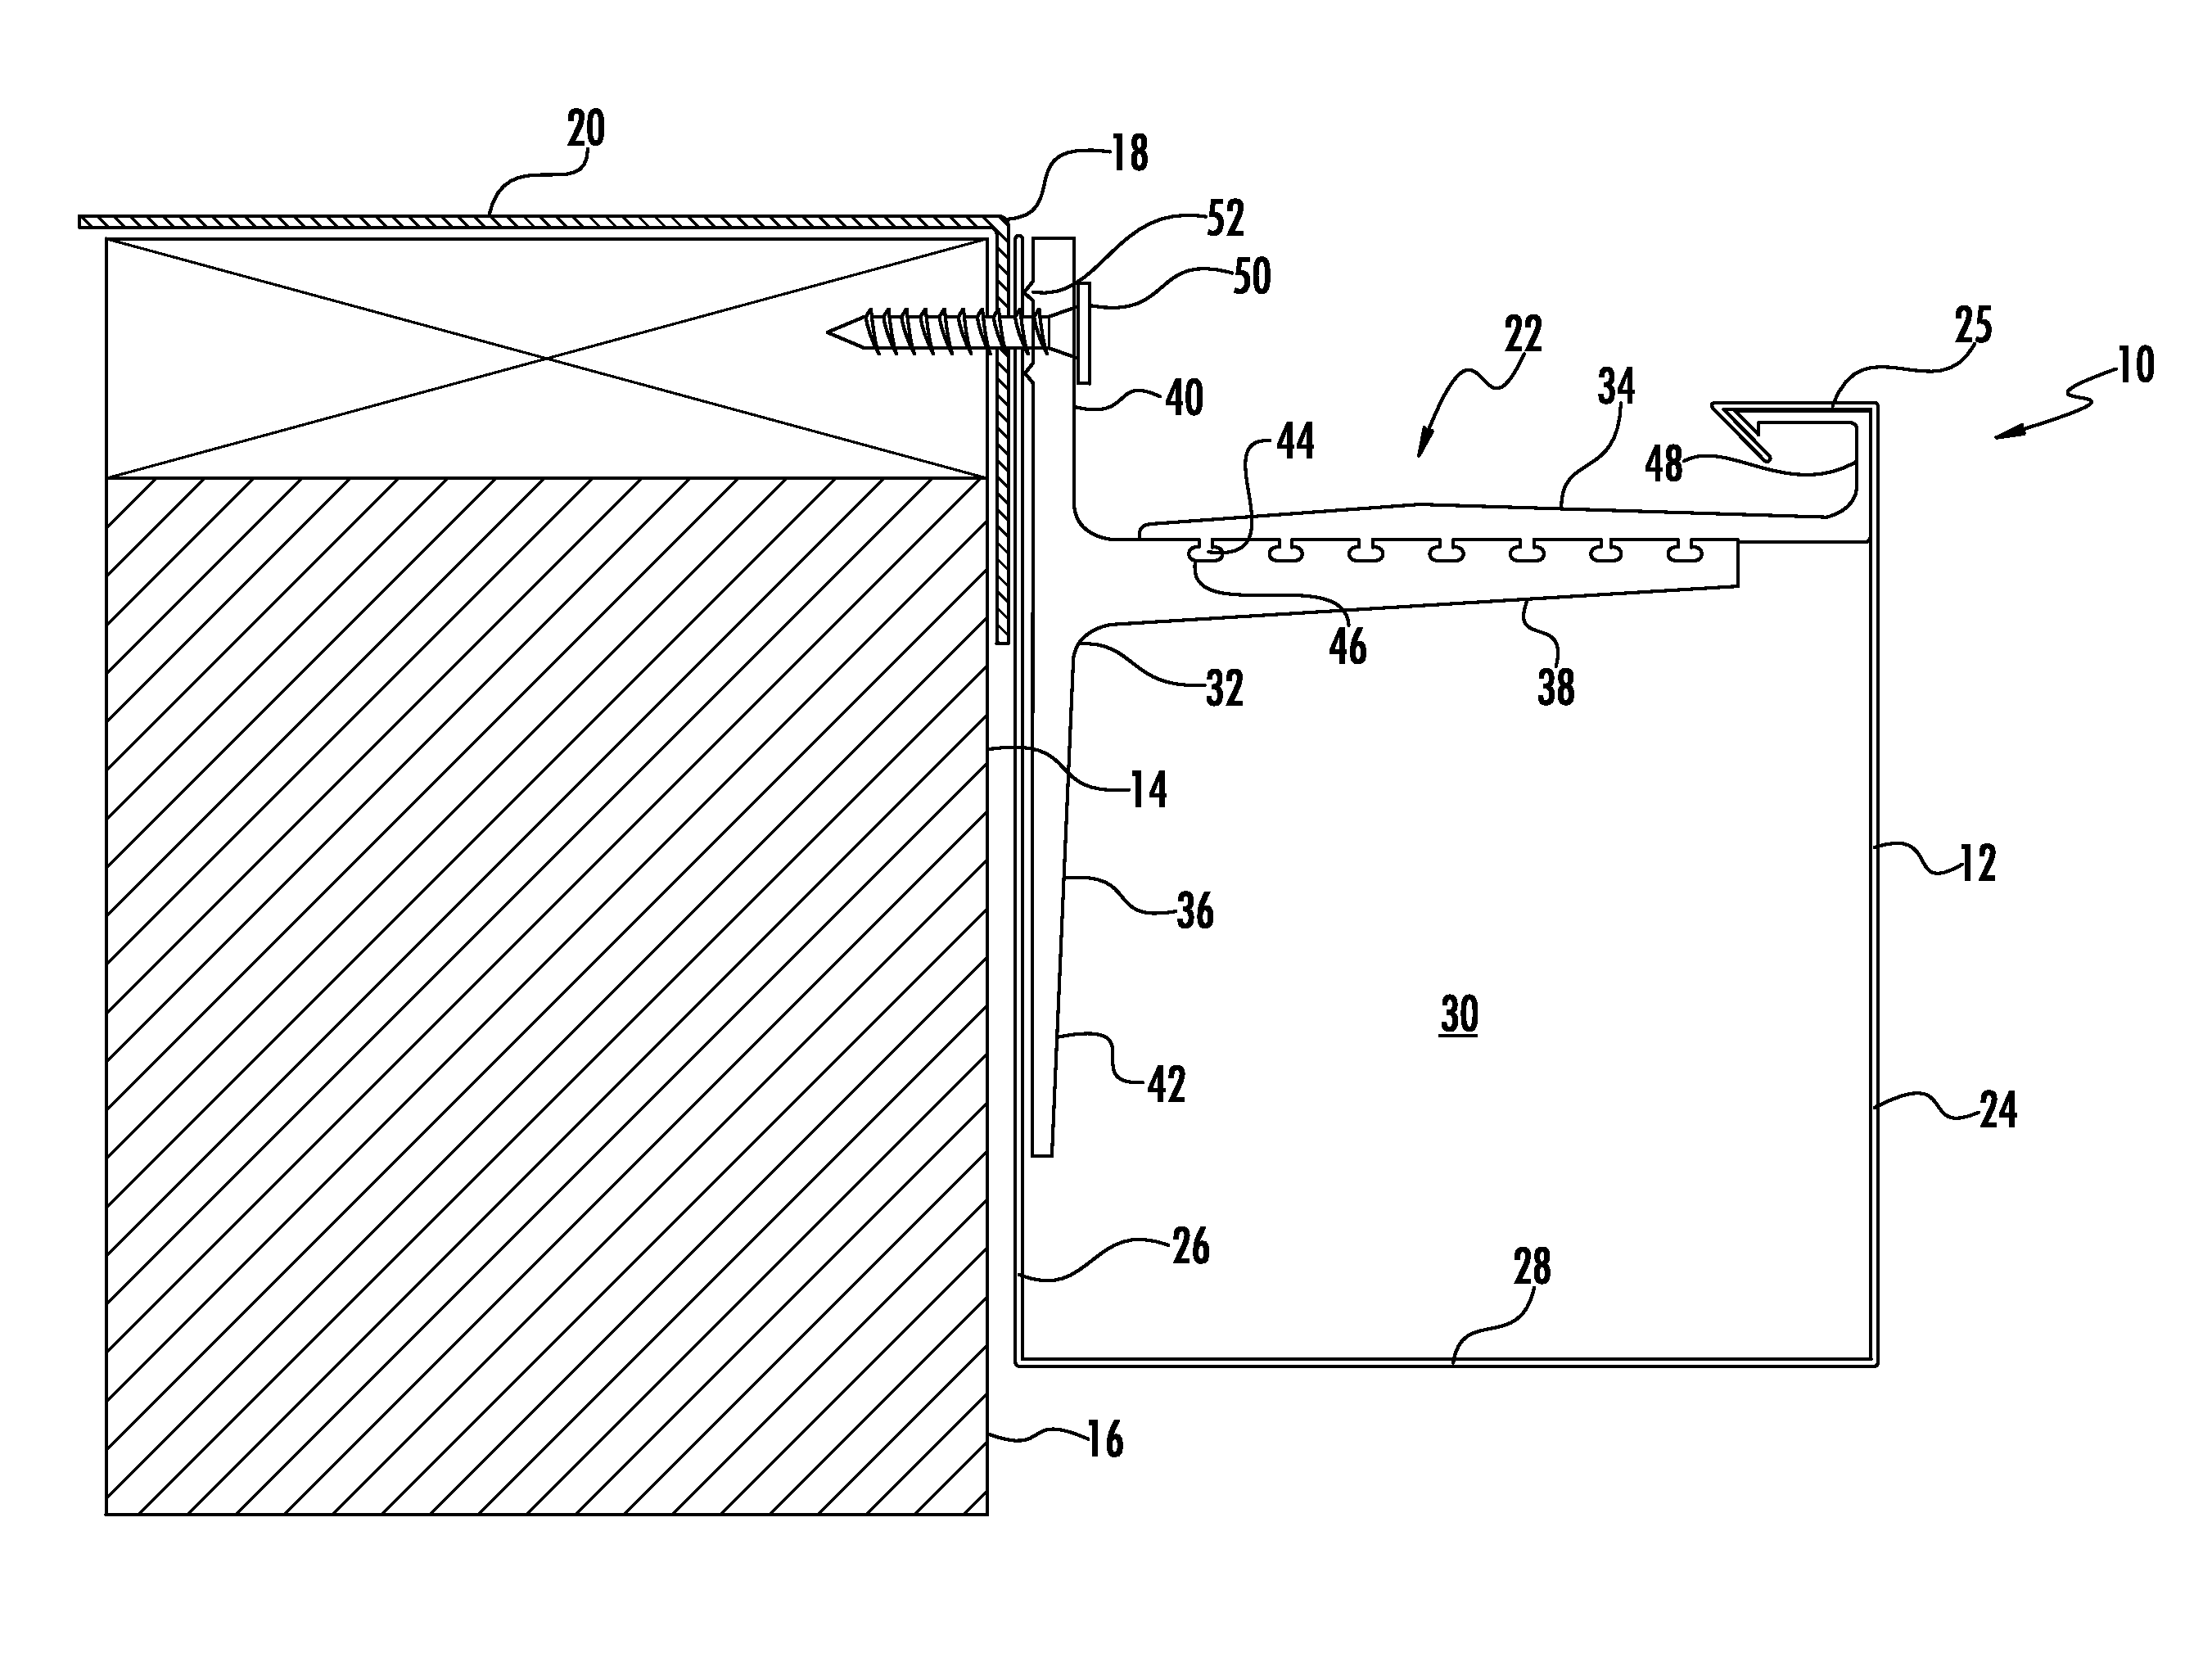 Adjustable bracket device for selectively mounting rain gutters on buildings